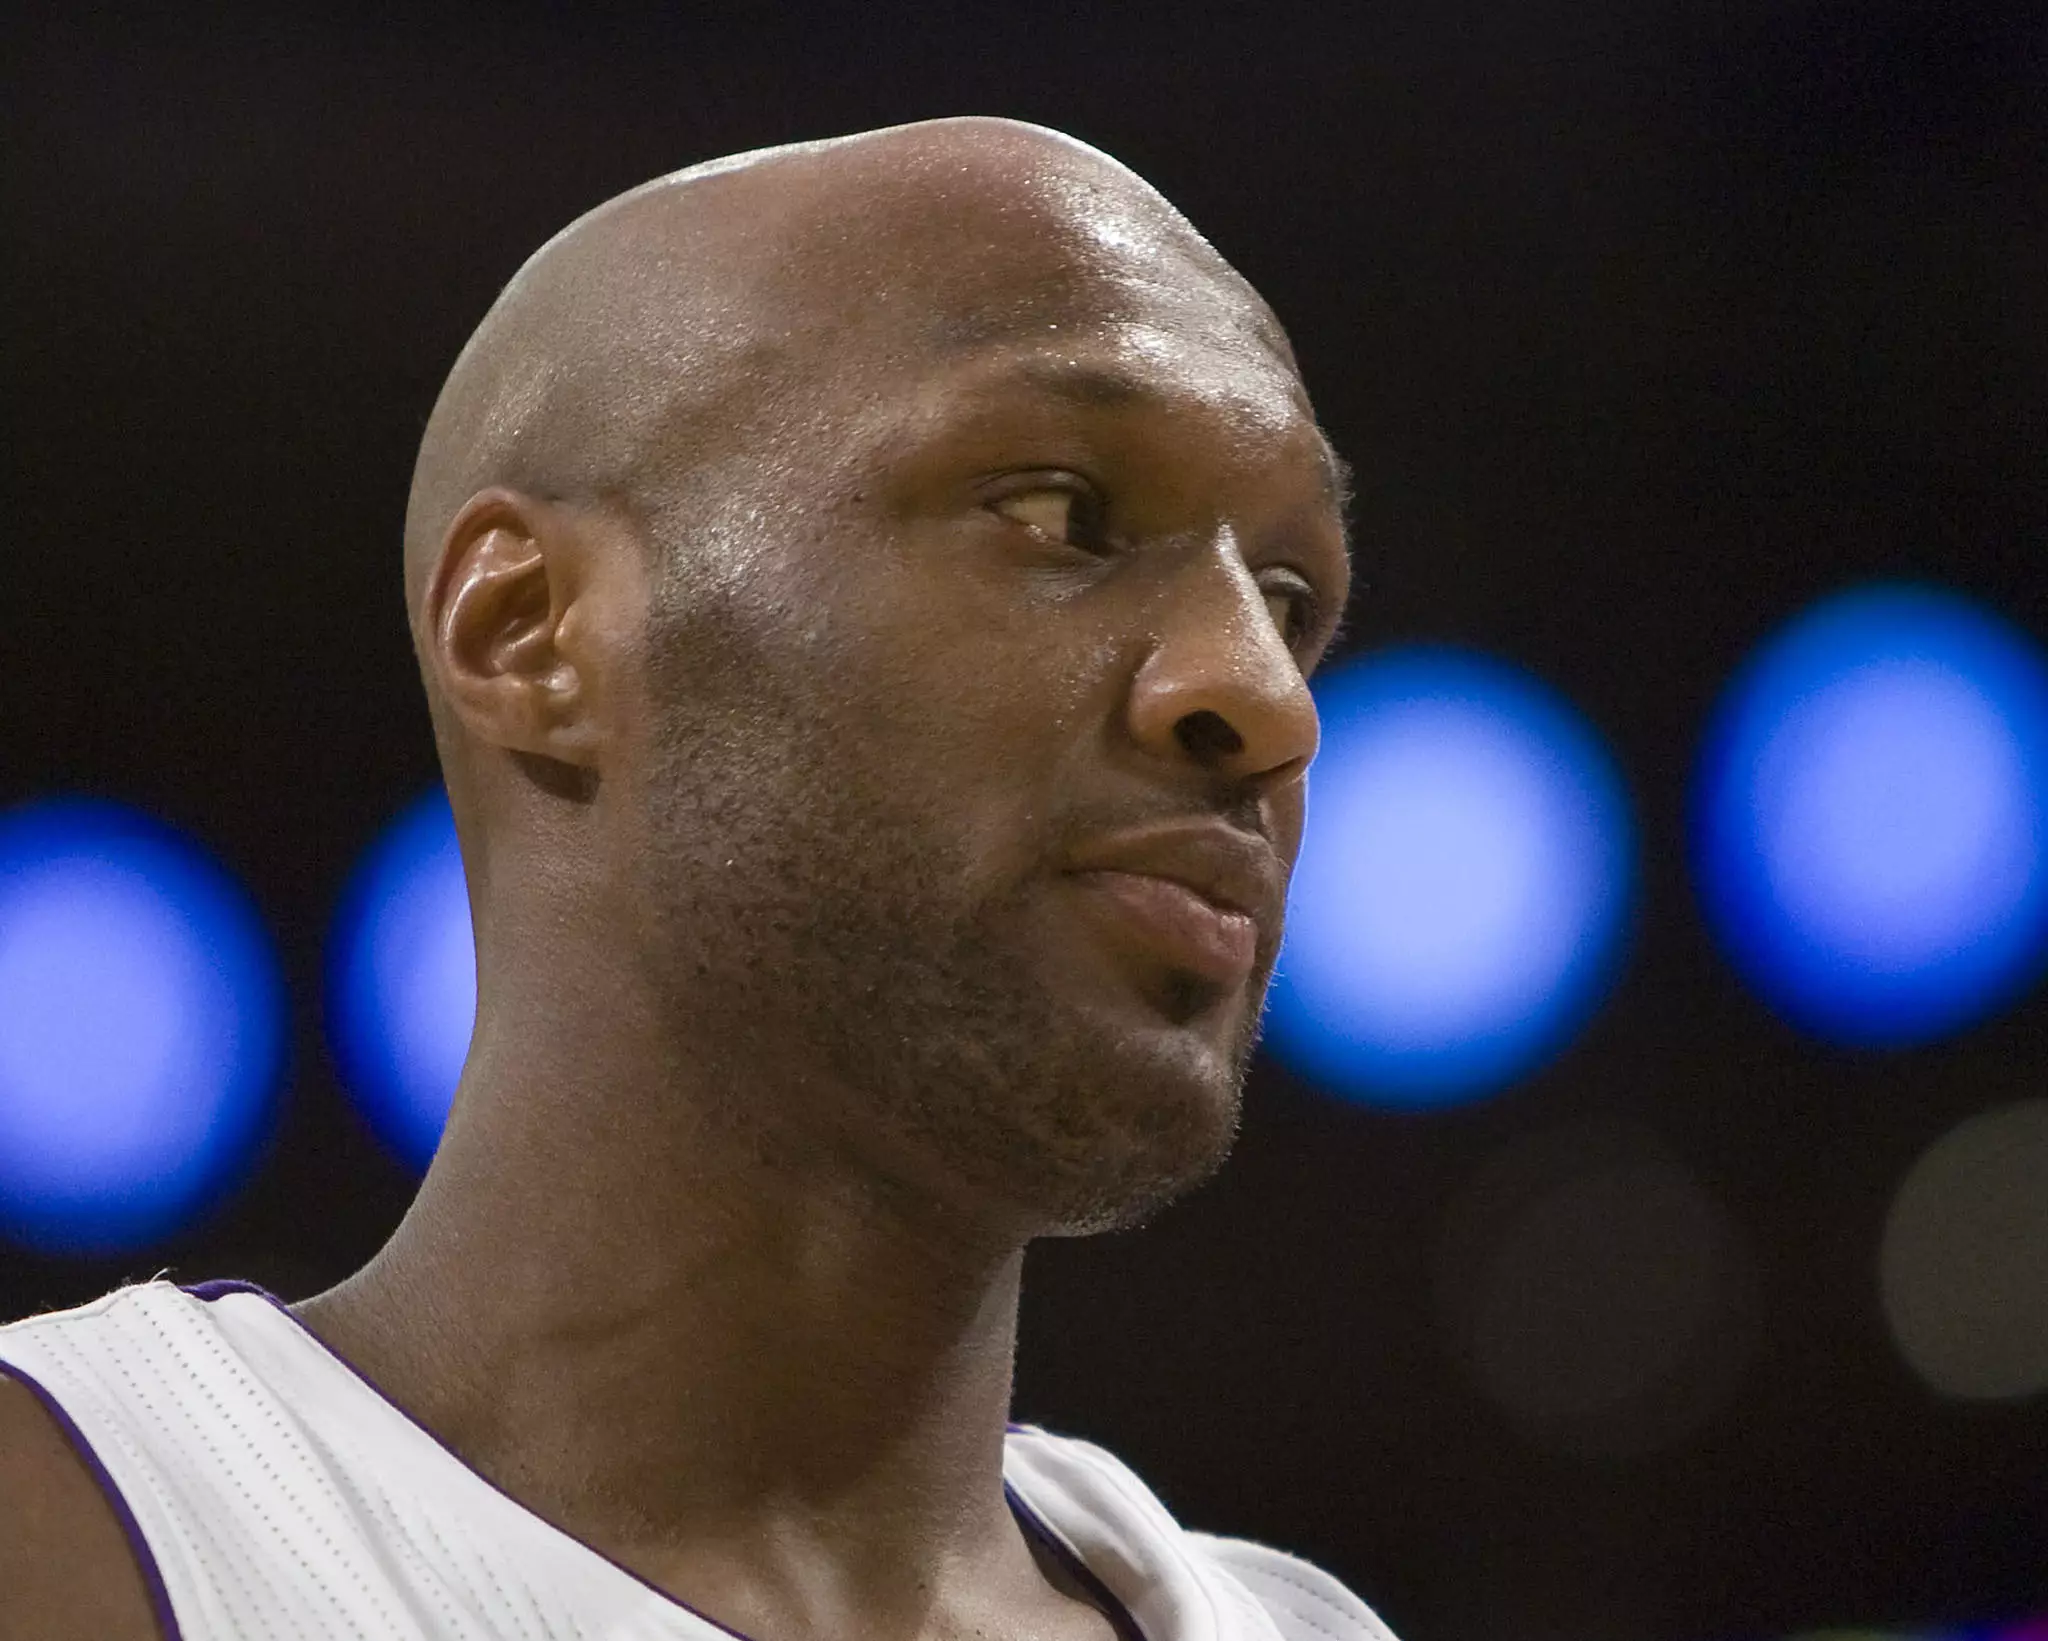 Lamar Odom played for the US Men's Basketball team in the 2004 Olympics.